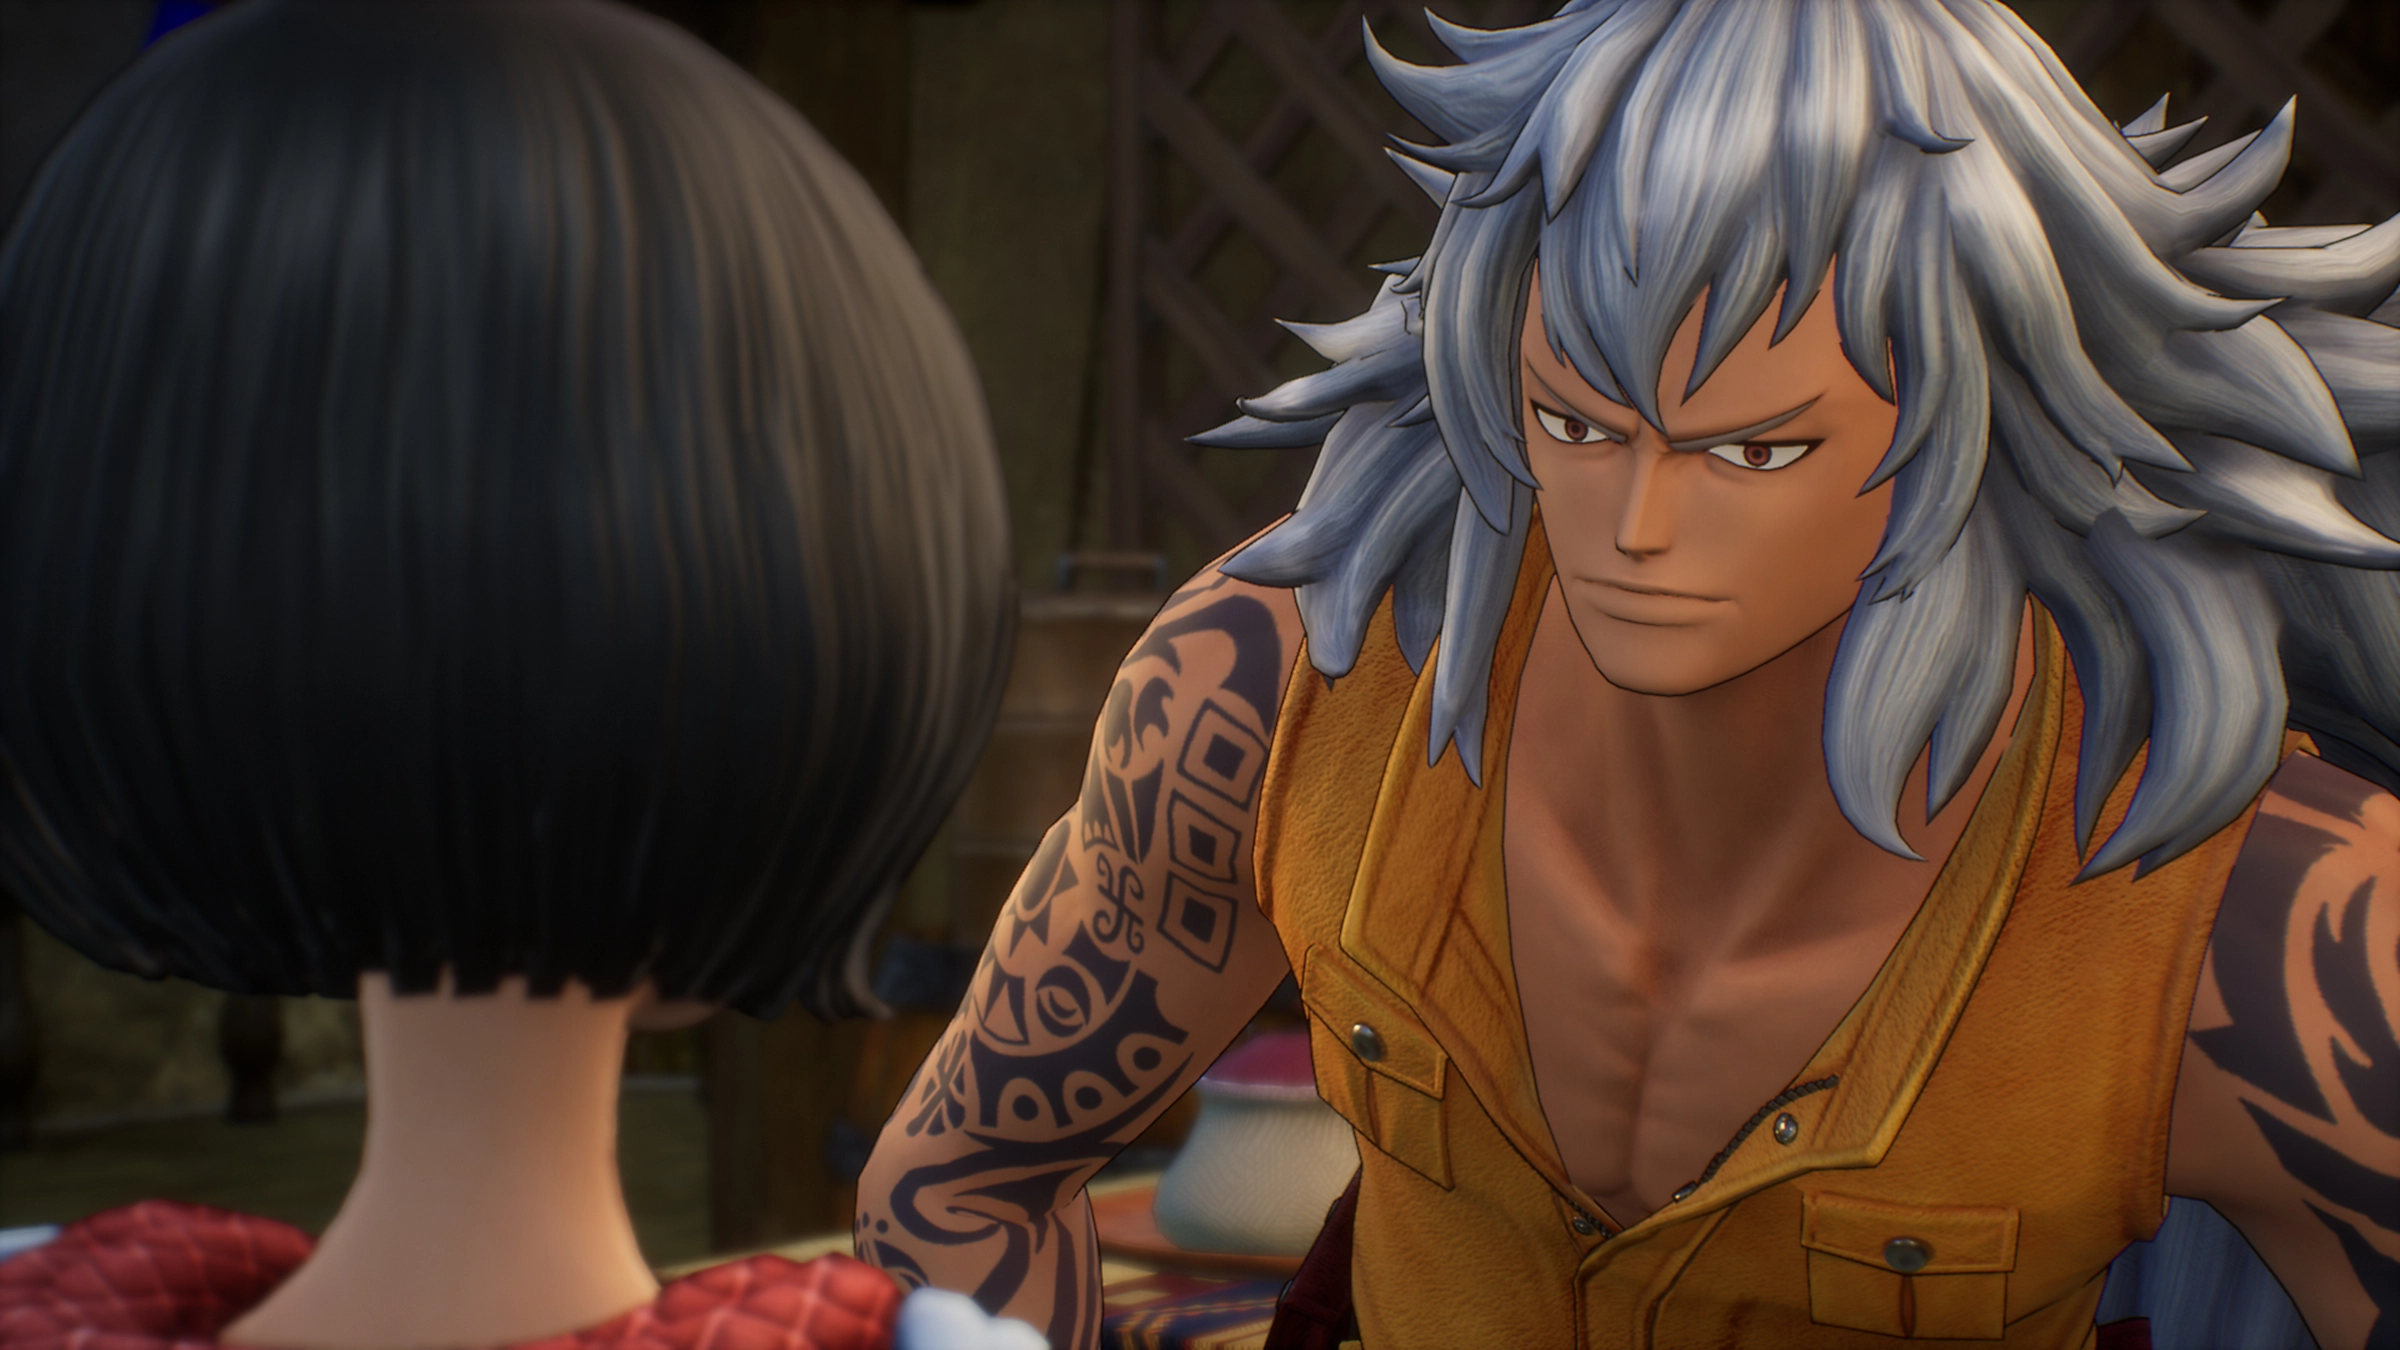 HD desktop wallpaper from the video game One Piece Odyssey, featuring a detailed close-up of a character with blue-gray hair and tribal tattoos.